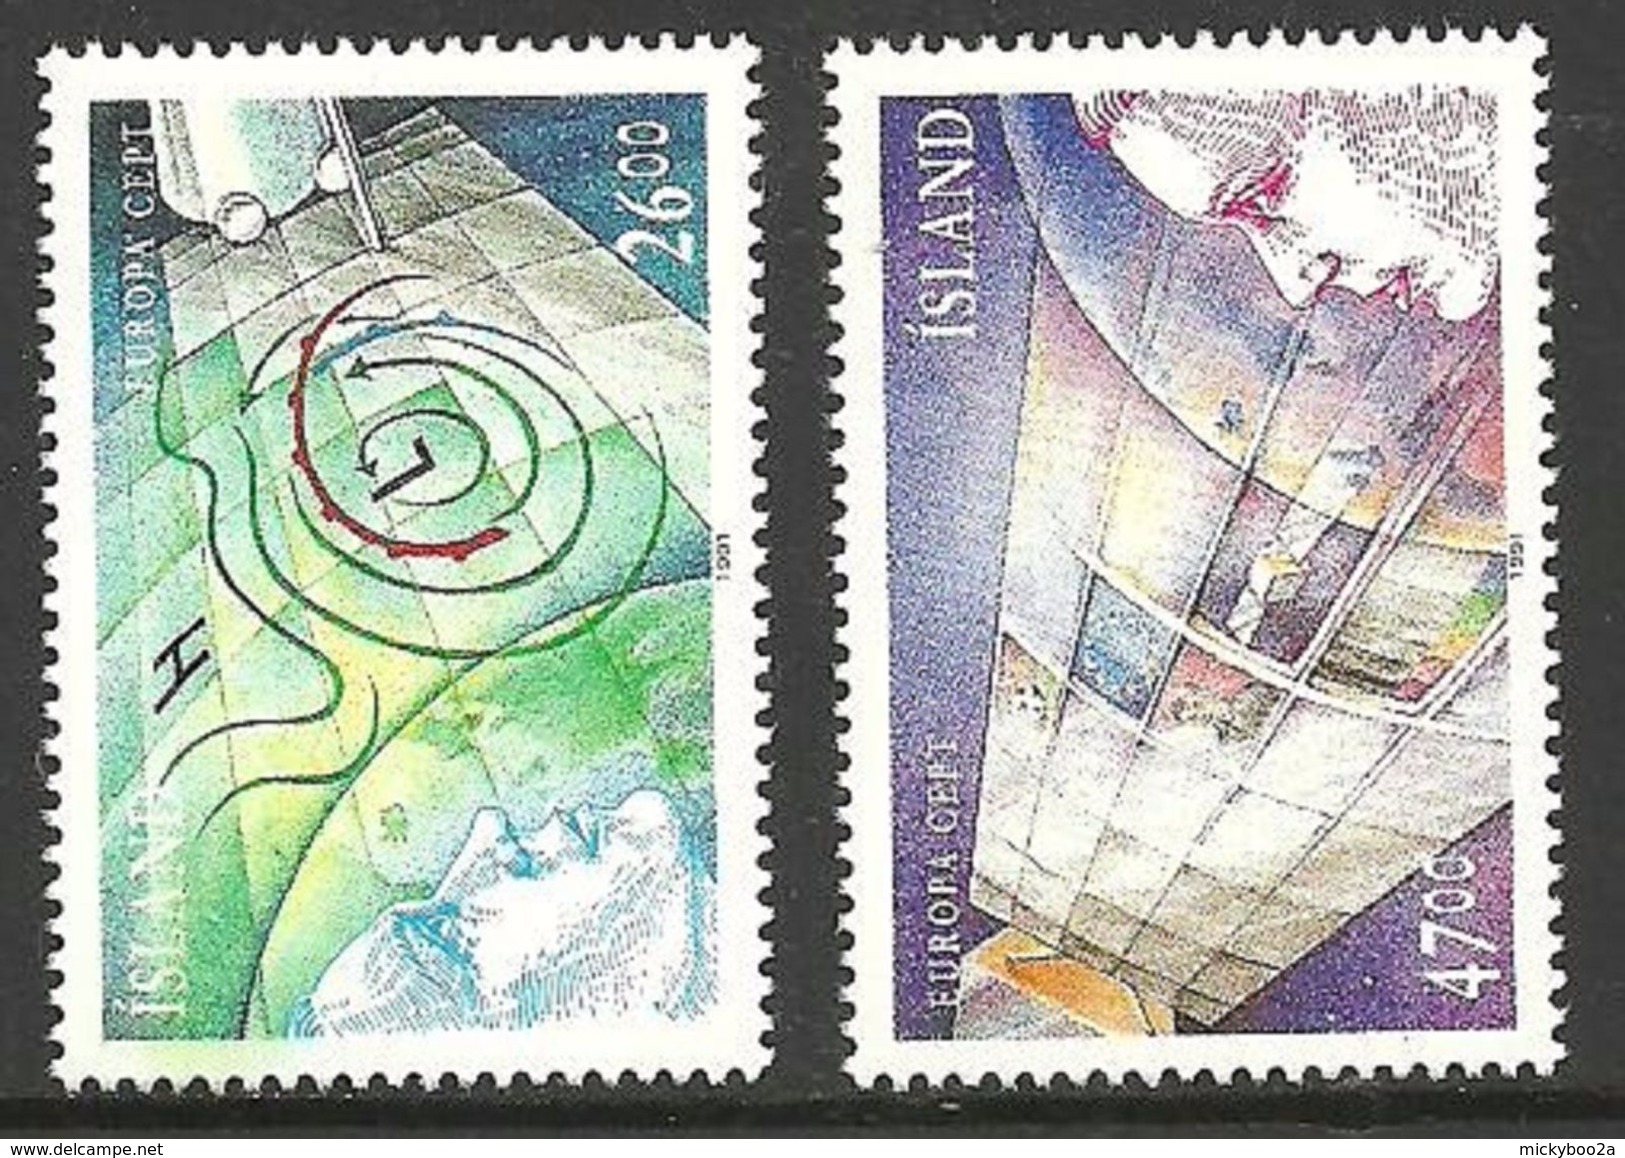 ICELAND 1991 EUROPA SPACE SET MNH - Unused Stamps